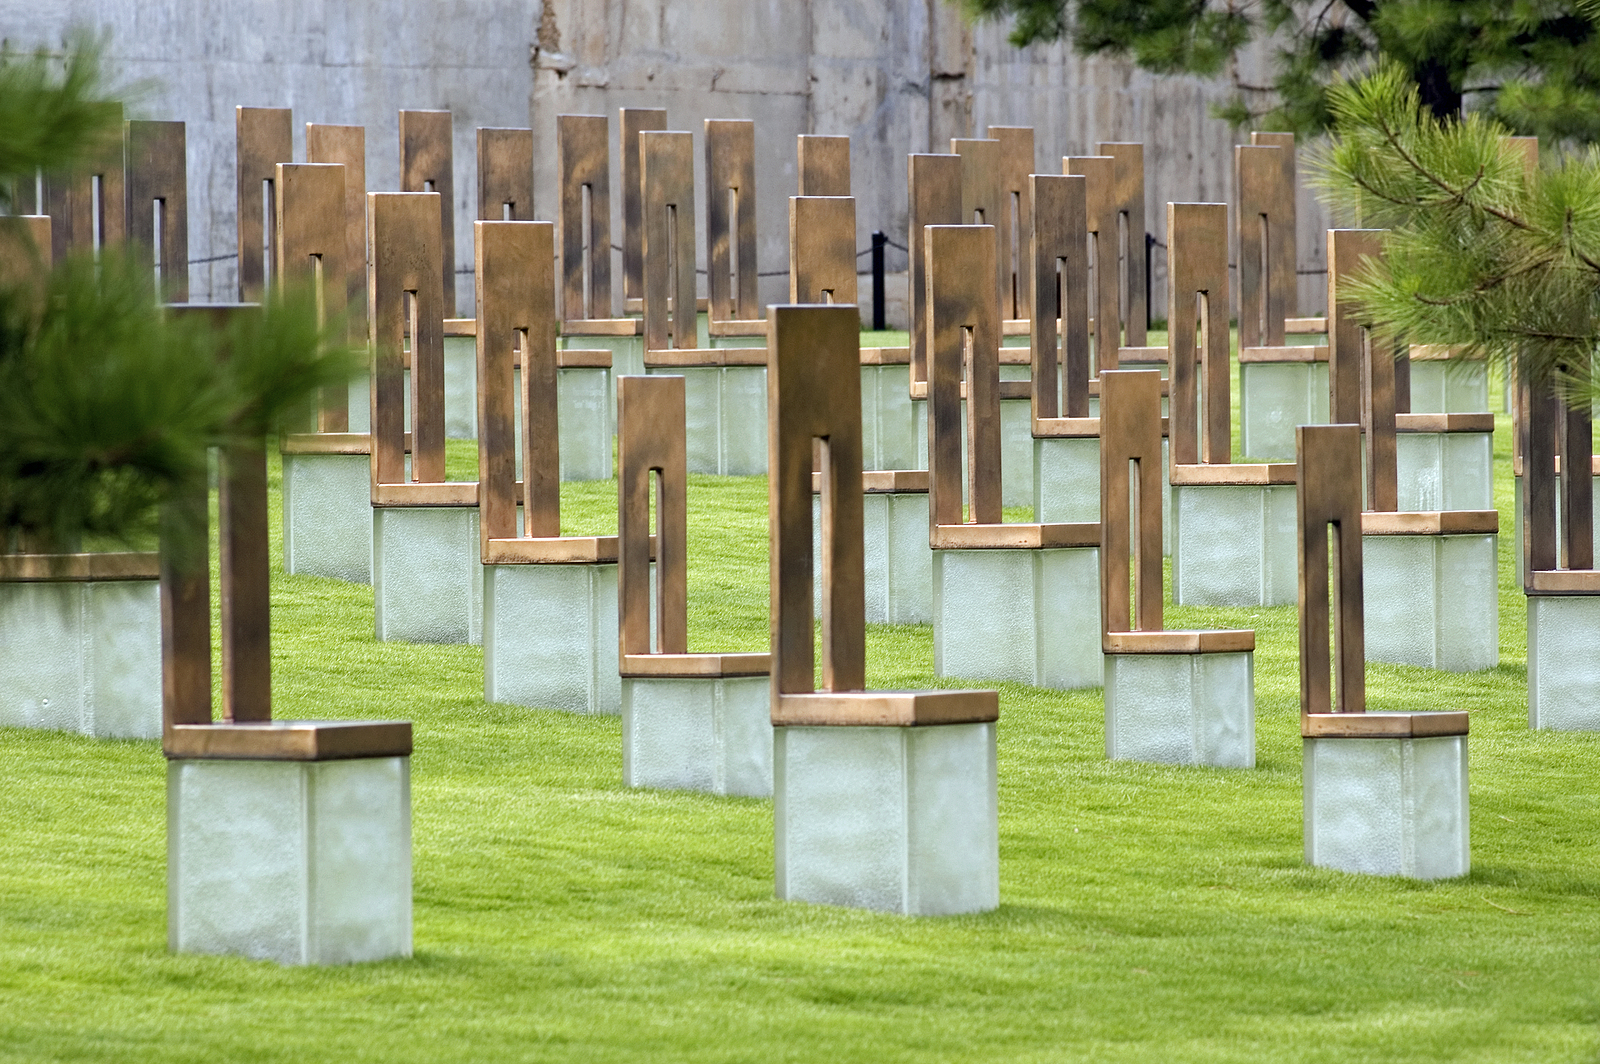 The Ones that Counted: Three Precious Lives Lost in the OKC Bombing of 1995